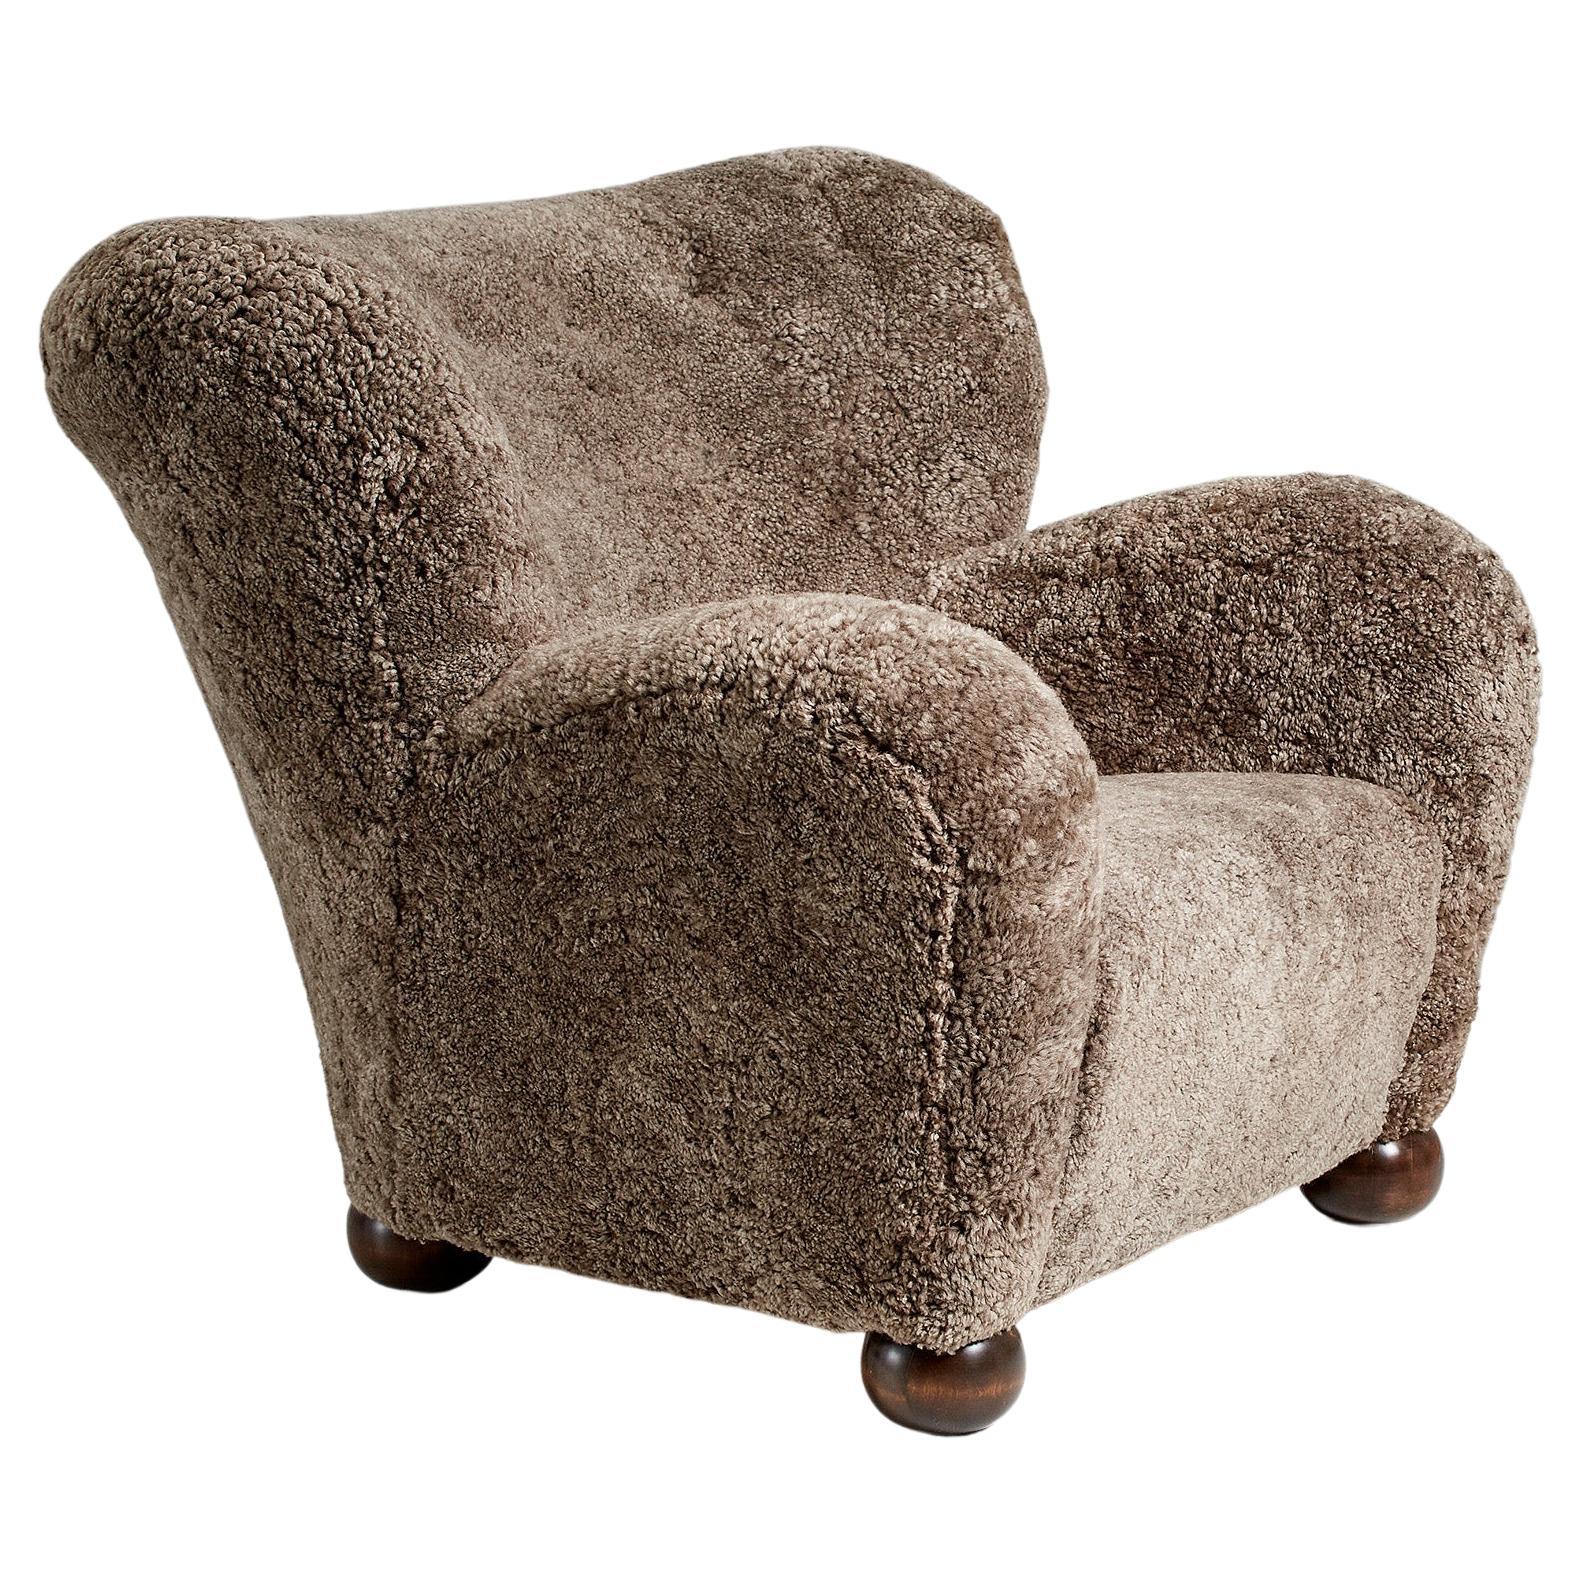 Marta Blomstedt 1930s Sheepskin Wing Chair for the Hotel Aulanko For Sale